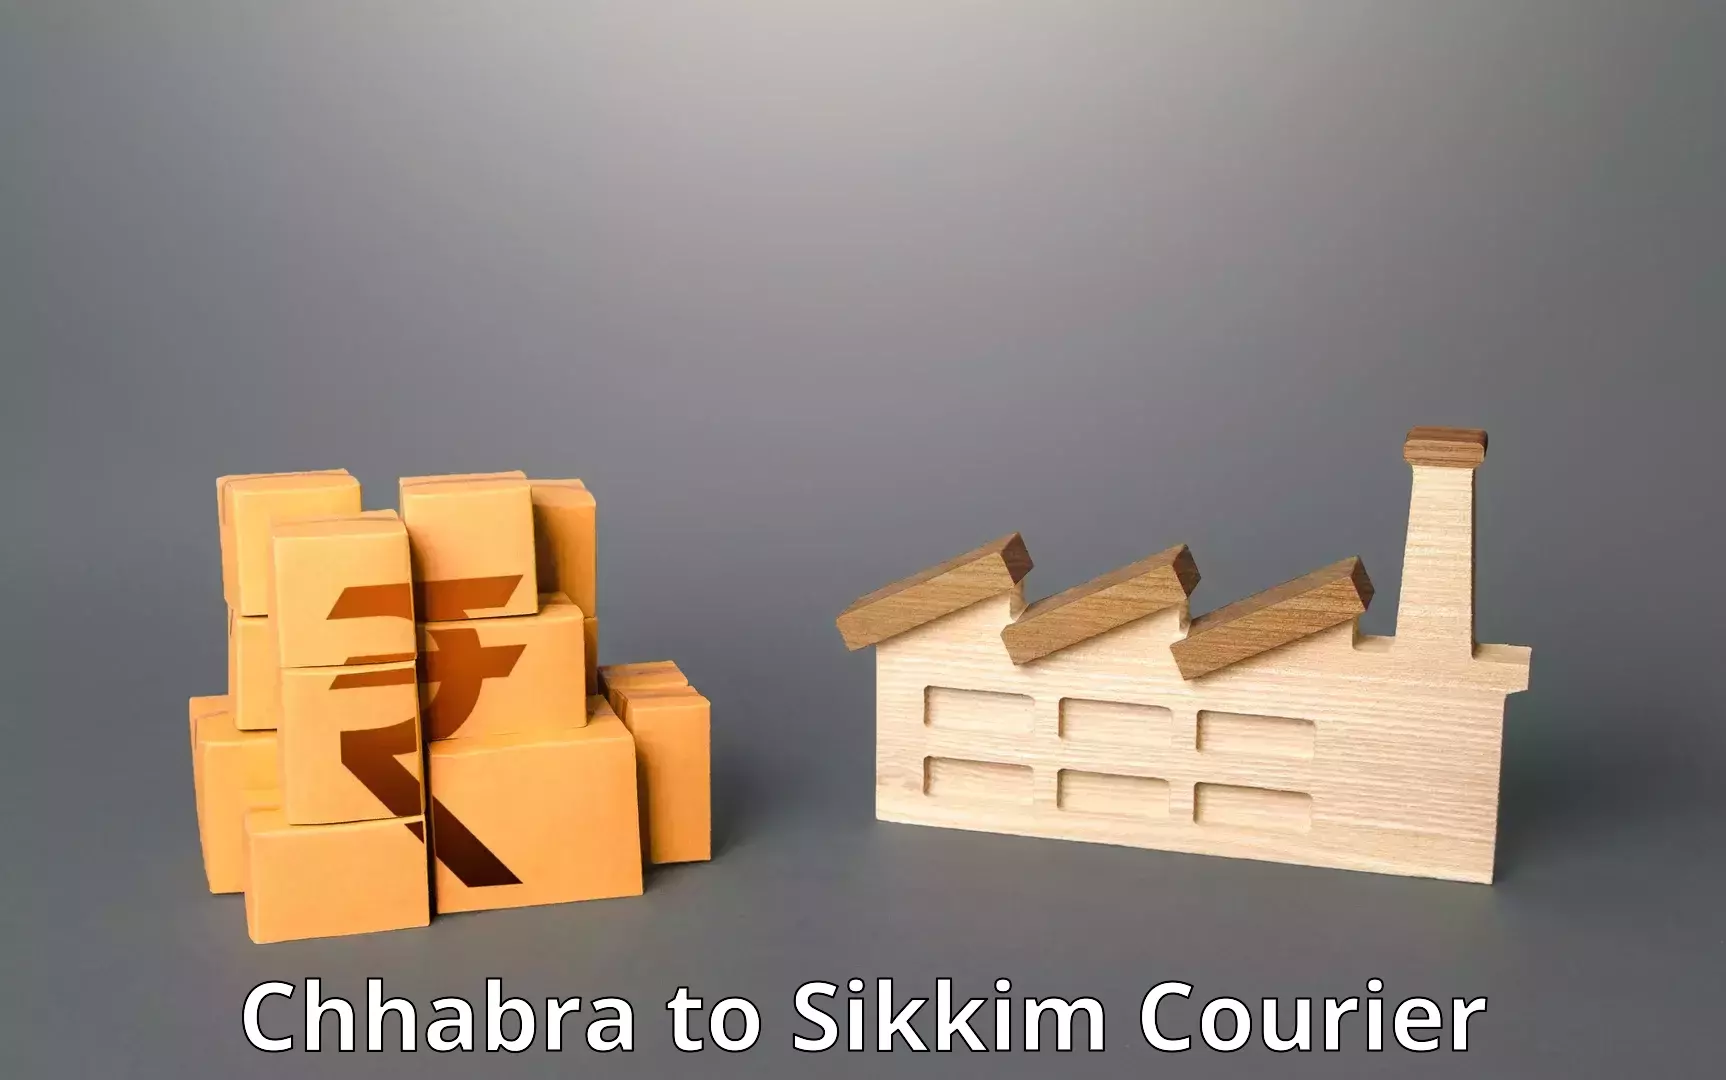 High-capacity parcel service Chhabra to East Sikkim